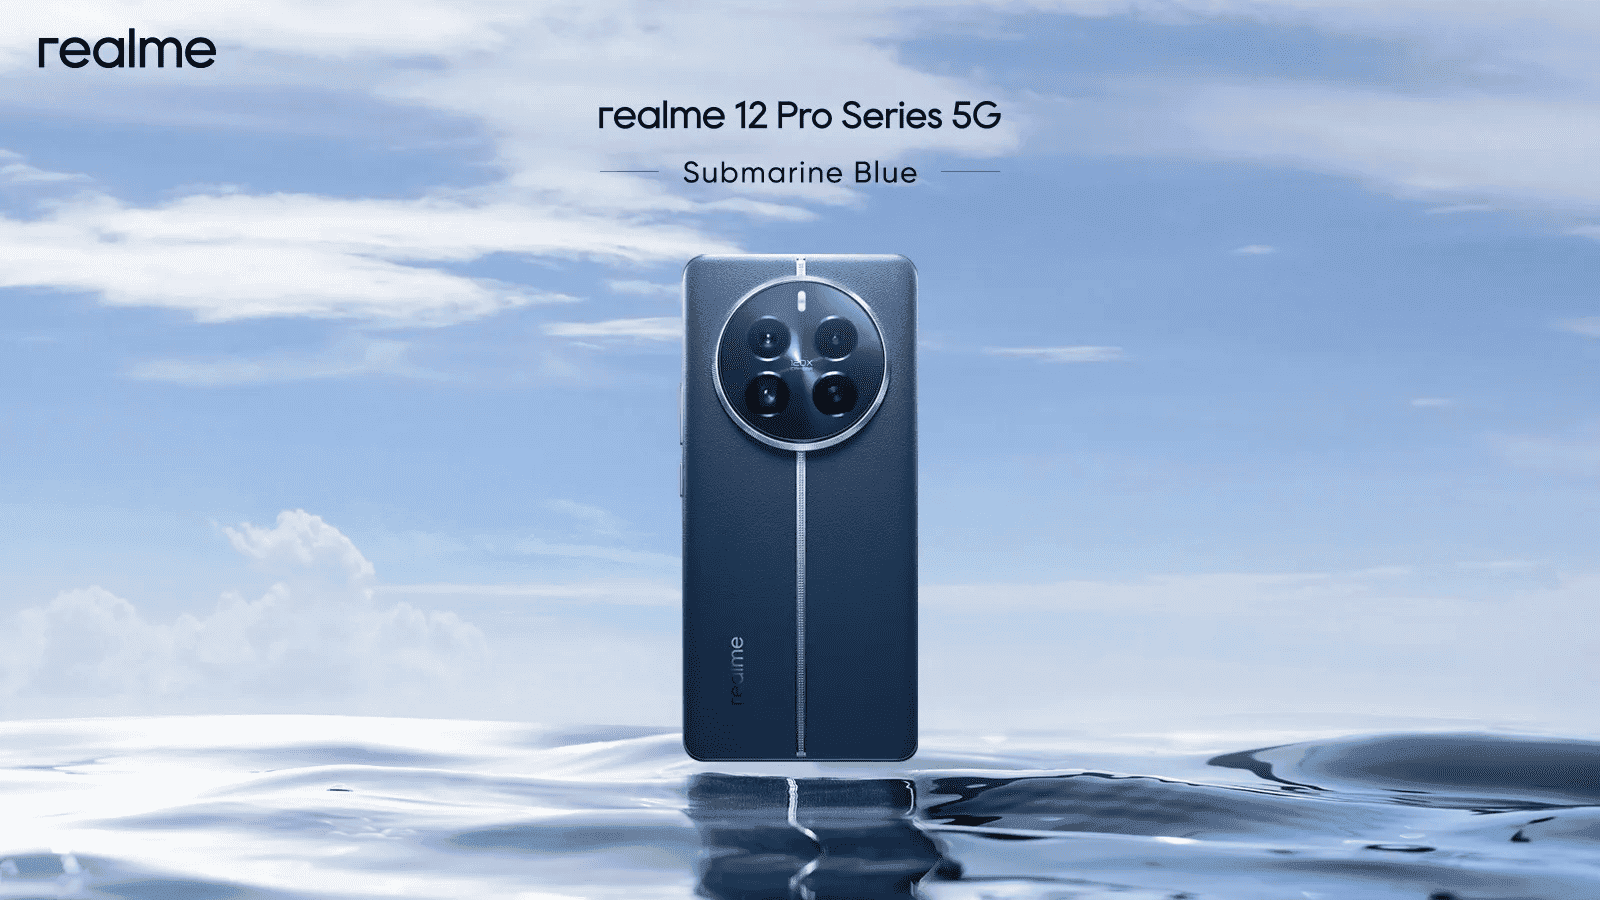 Realme 12 Pro+: Realme 12 Pro+ Specifications Leaked Ahead Of Jan 29 Launch  In India